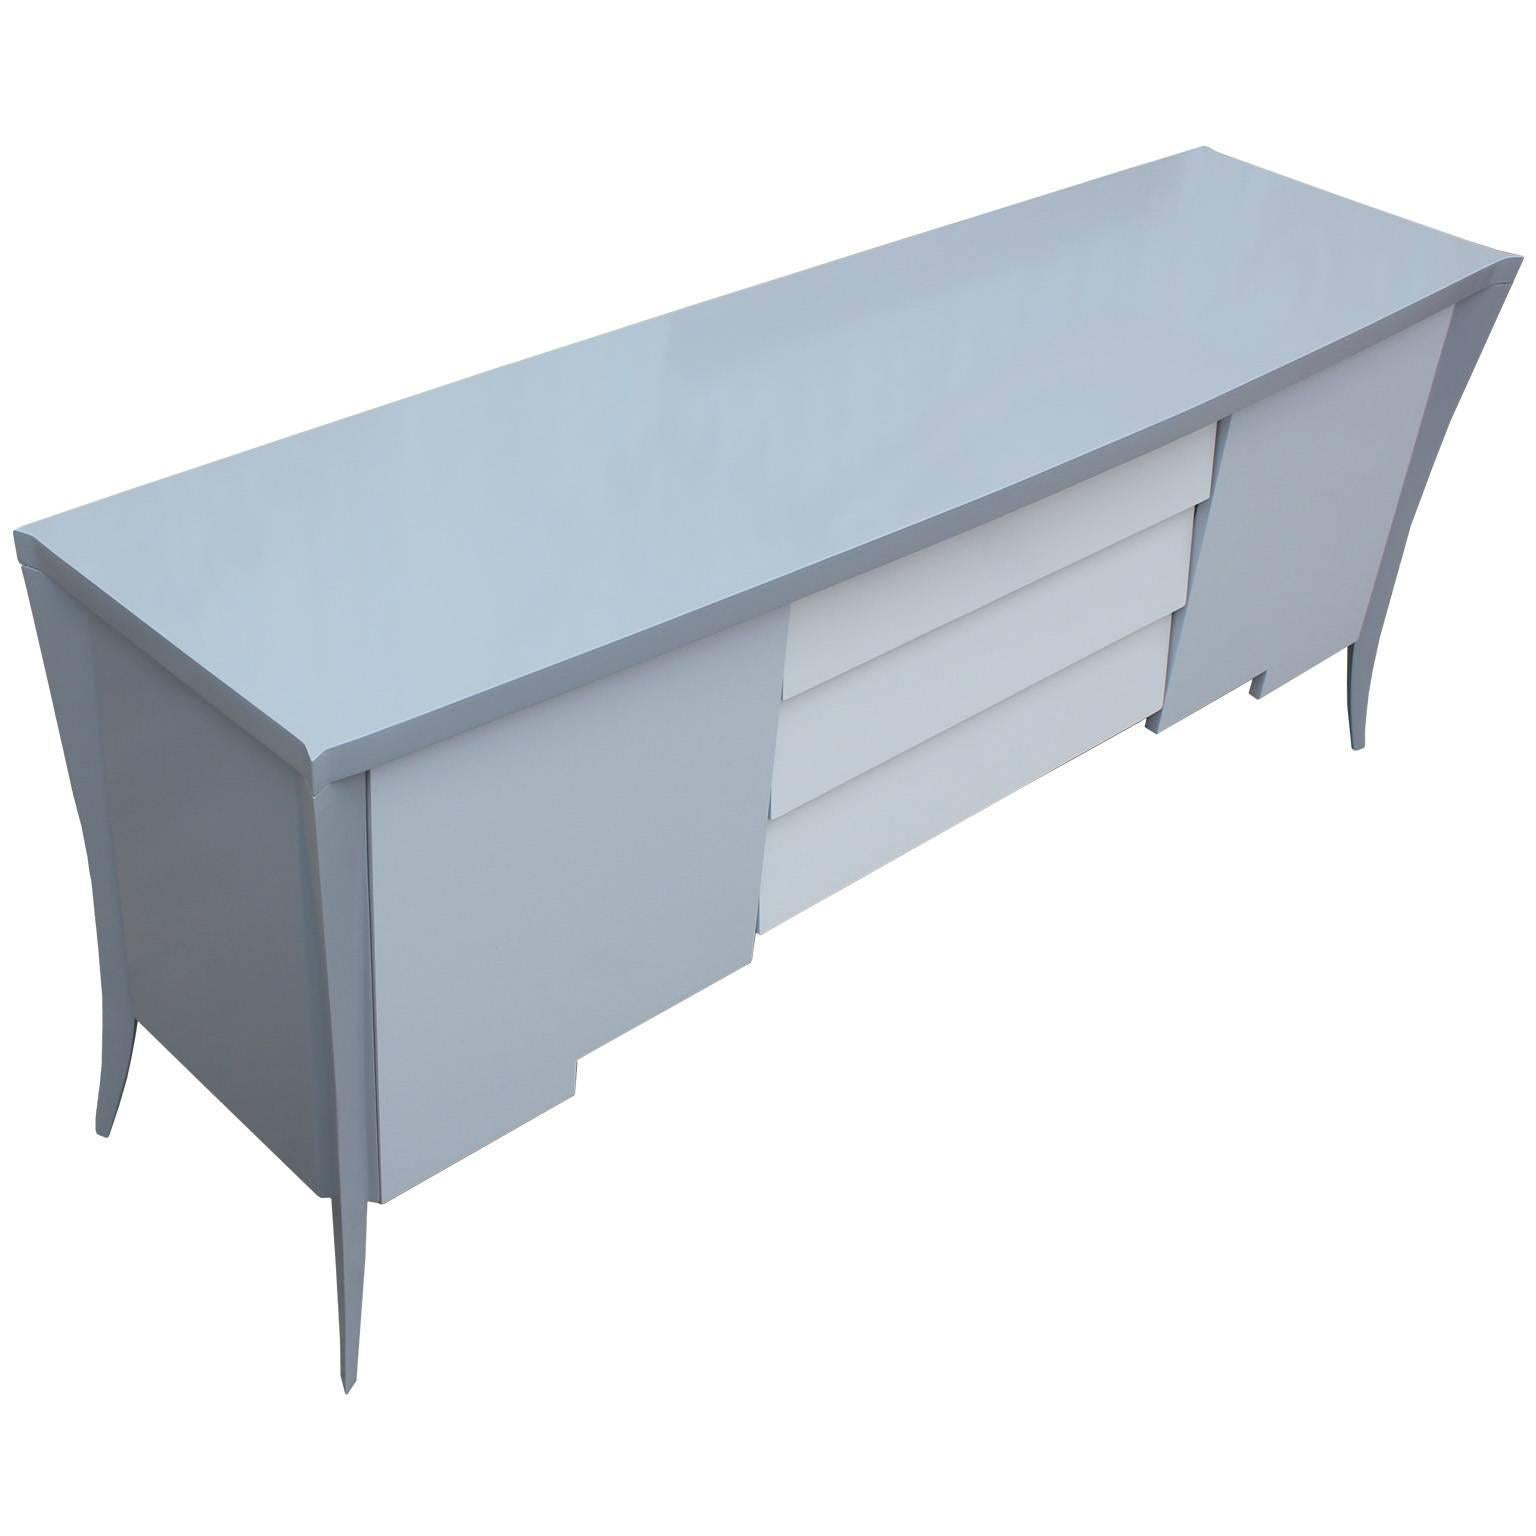 Fabulous, sculptural sideboard or credenza. Sideboard is freshly refinished in an incredibly smooth lacquer in three shades of grey. Cabinet doors on either side open to a single shelf. Three pull out drawers provide additional storage. Stunning